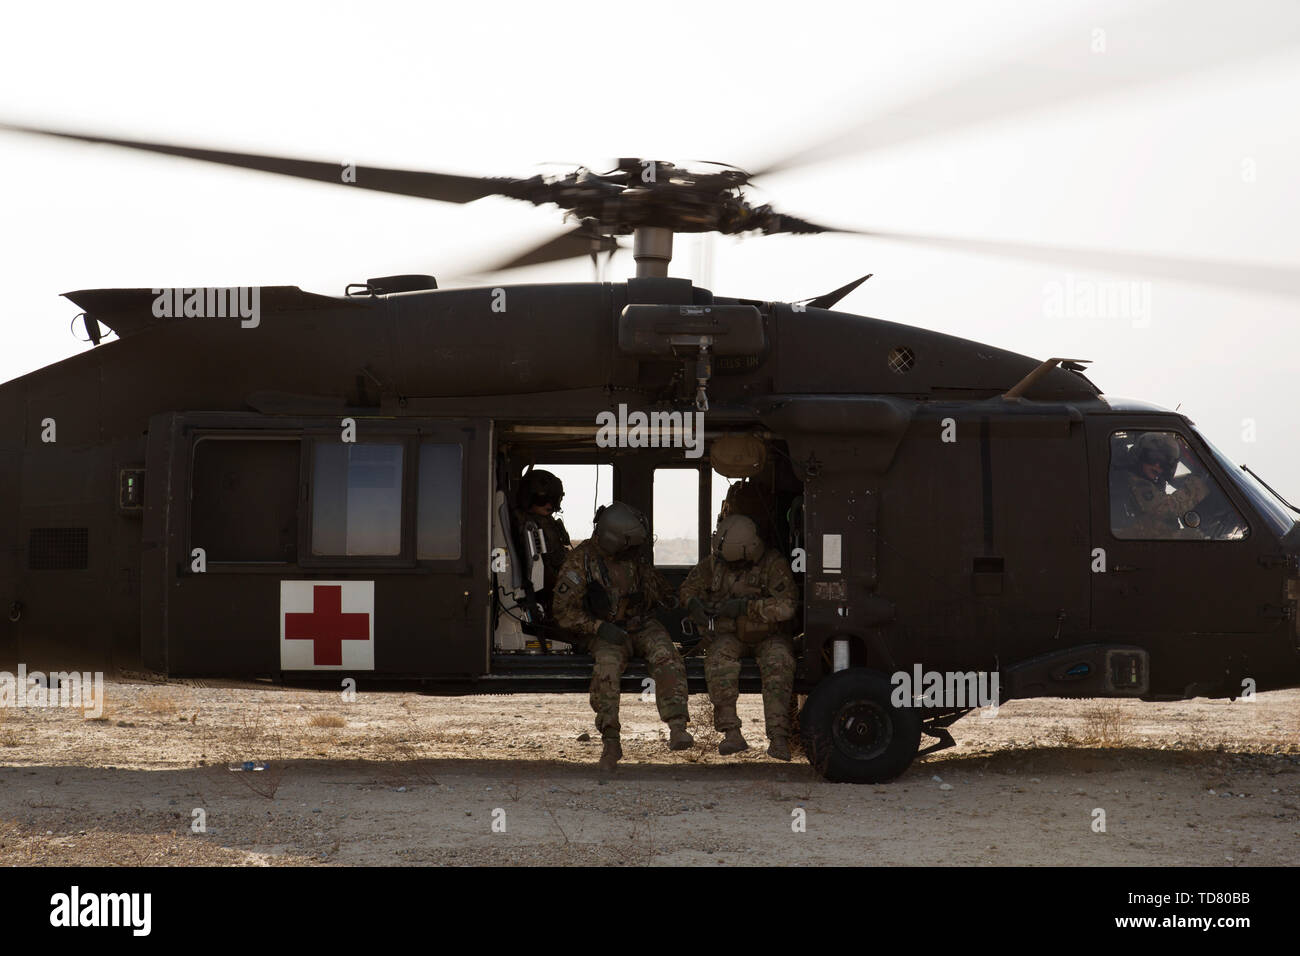 Bagram, Afghanistan. 16th Oct, 2018. A Medevac Blackhawk UH-60 during a mission.FOB(forward operating base) Dahlke is a new austere US Army base, as of Spring 2018, in Afghanistan that began with a large presence of soldiers from the 101st Combat Aviation Brigade. Dahlke is strategically located about 60 miles South of Kabul. Every type of air support mission is done from here, from medevac to resupply to combat. Dahlke was built from the ground up over the past year by the soldiers stationed here. It is built on the South end of the now abandoned Shank Base. In 2014 Shank was handed ove Stock Photo